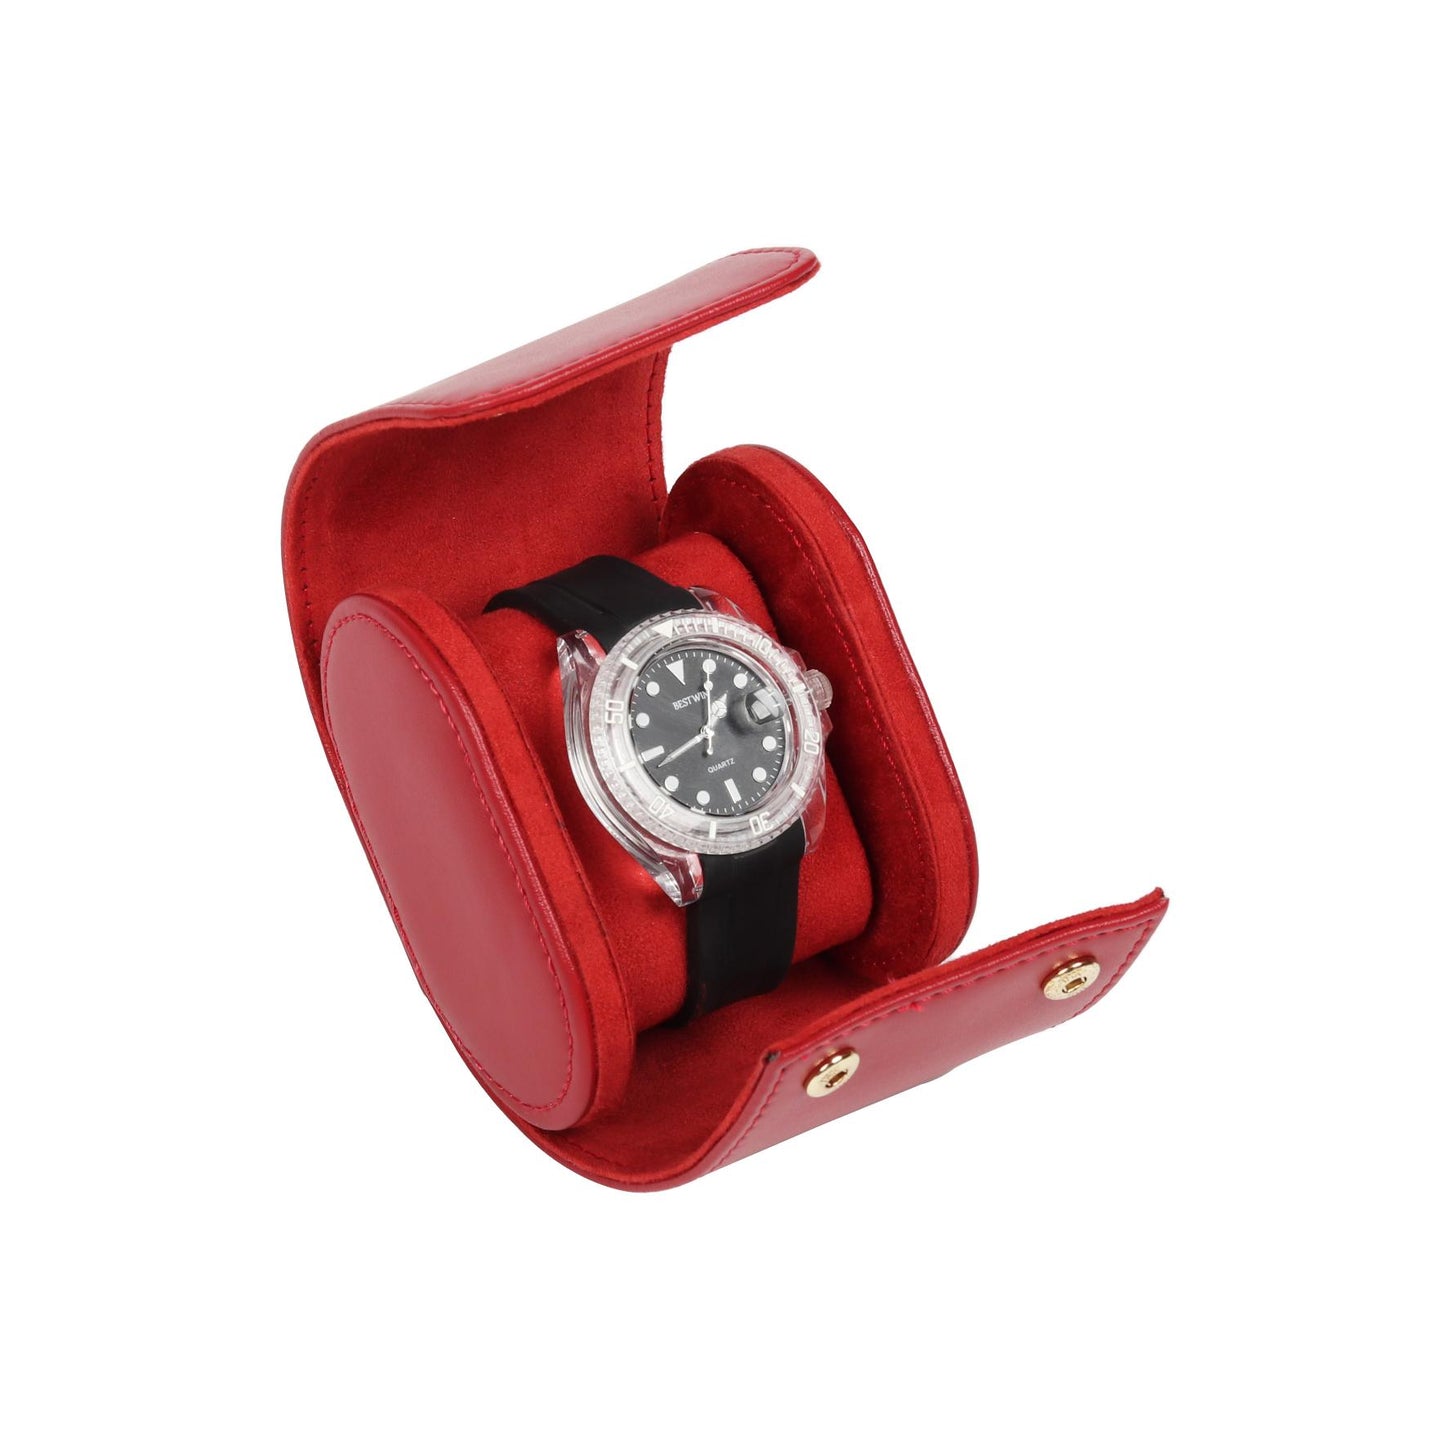 HQ Single Watch Genuine Leather Travel Case/Roll - Velvet Red